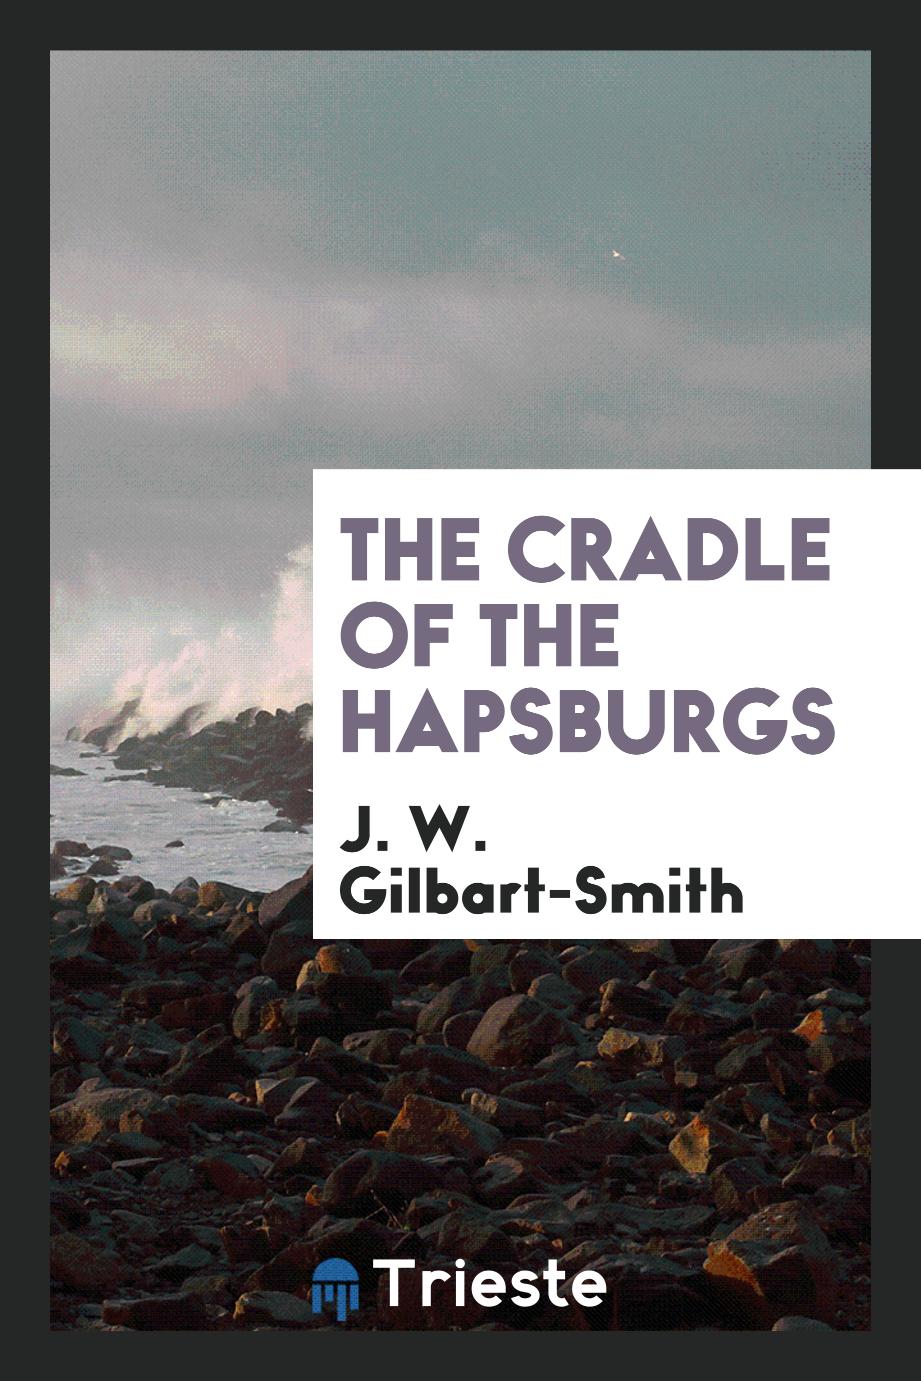 The cradle of the Hapsburgs